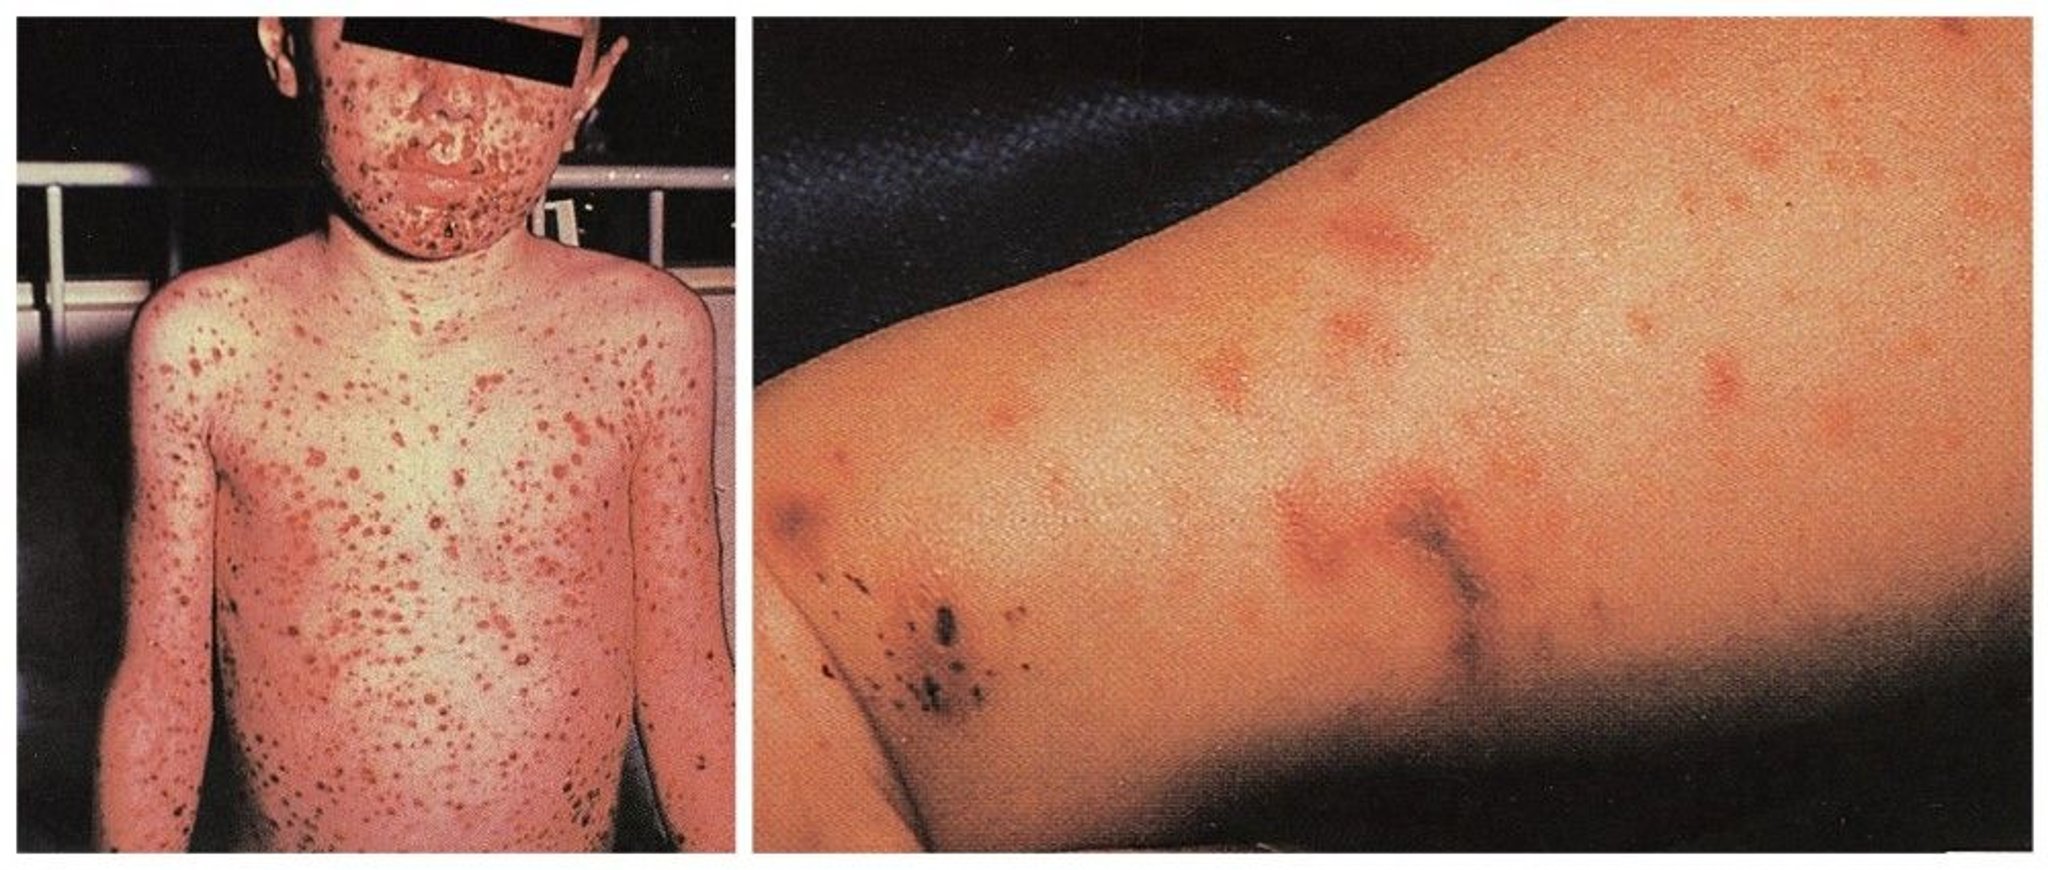 Widespread Rash Due to Meningococcal Bloodstream Infection